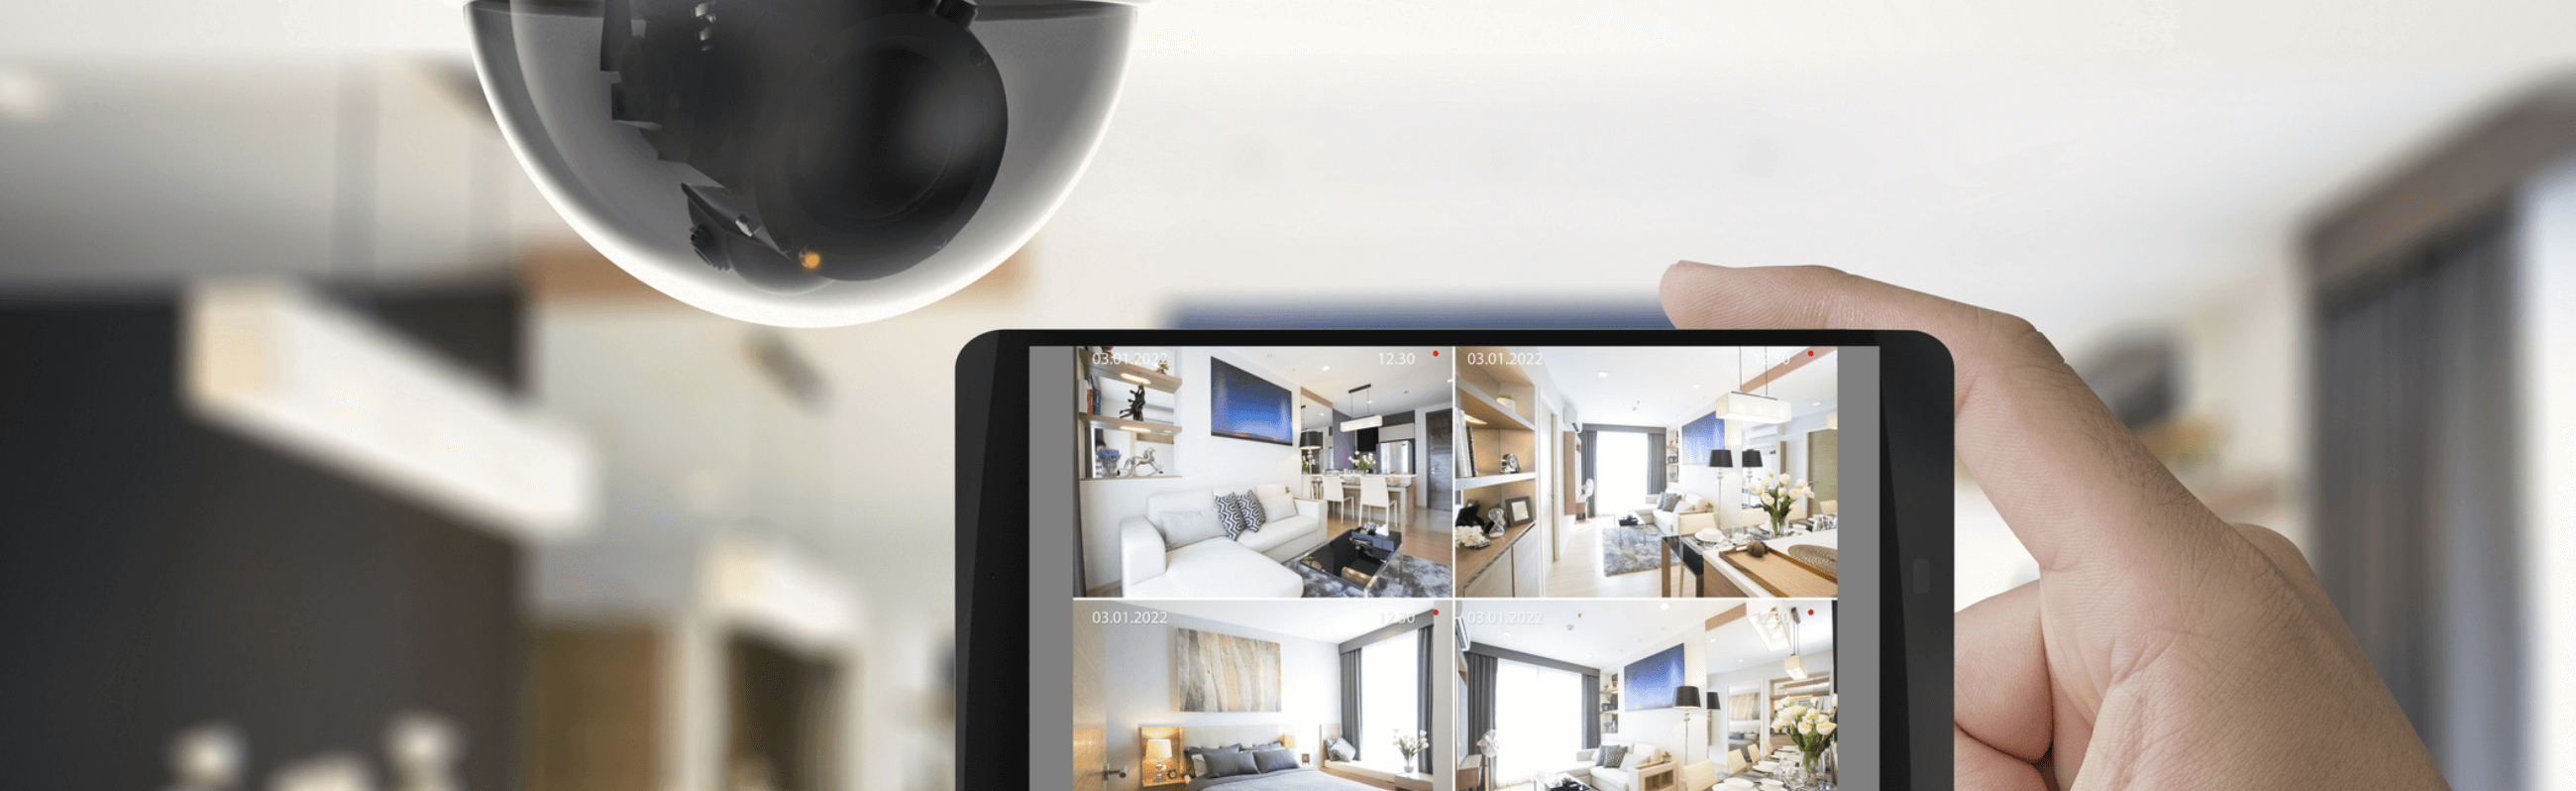 Smart security camera and smartphone